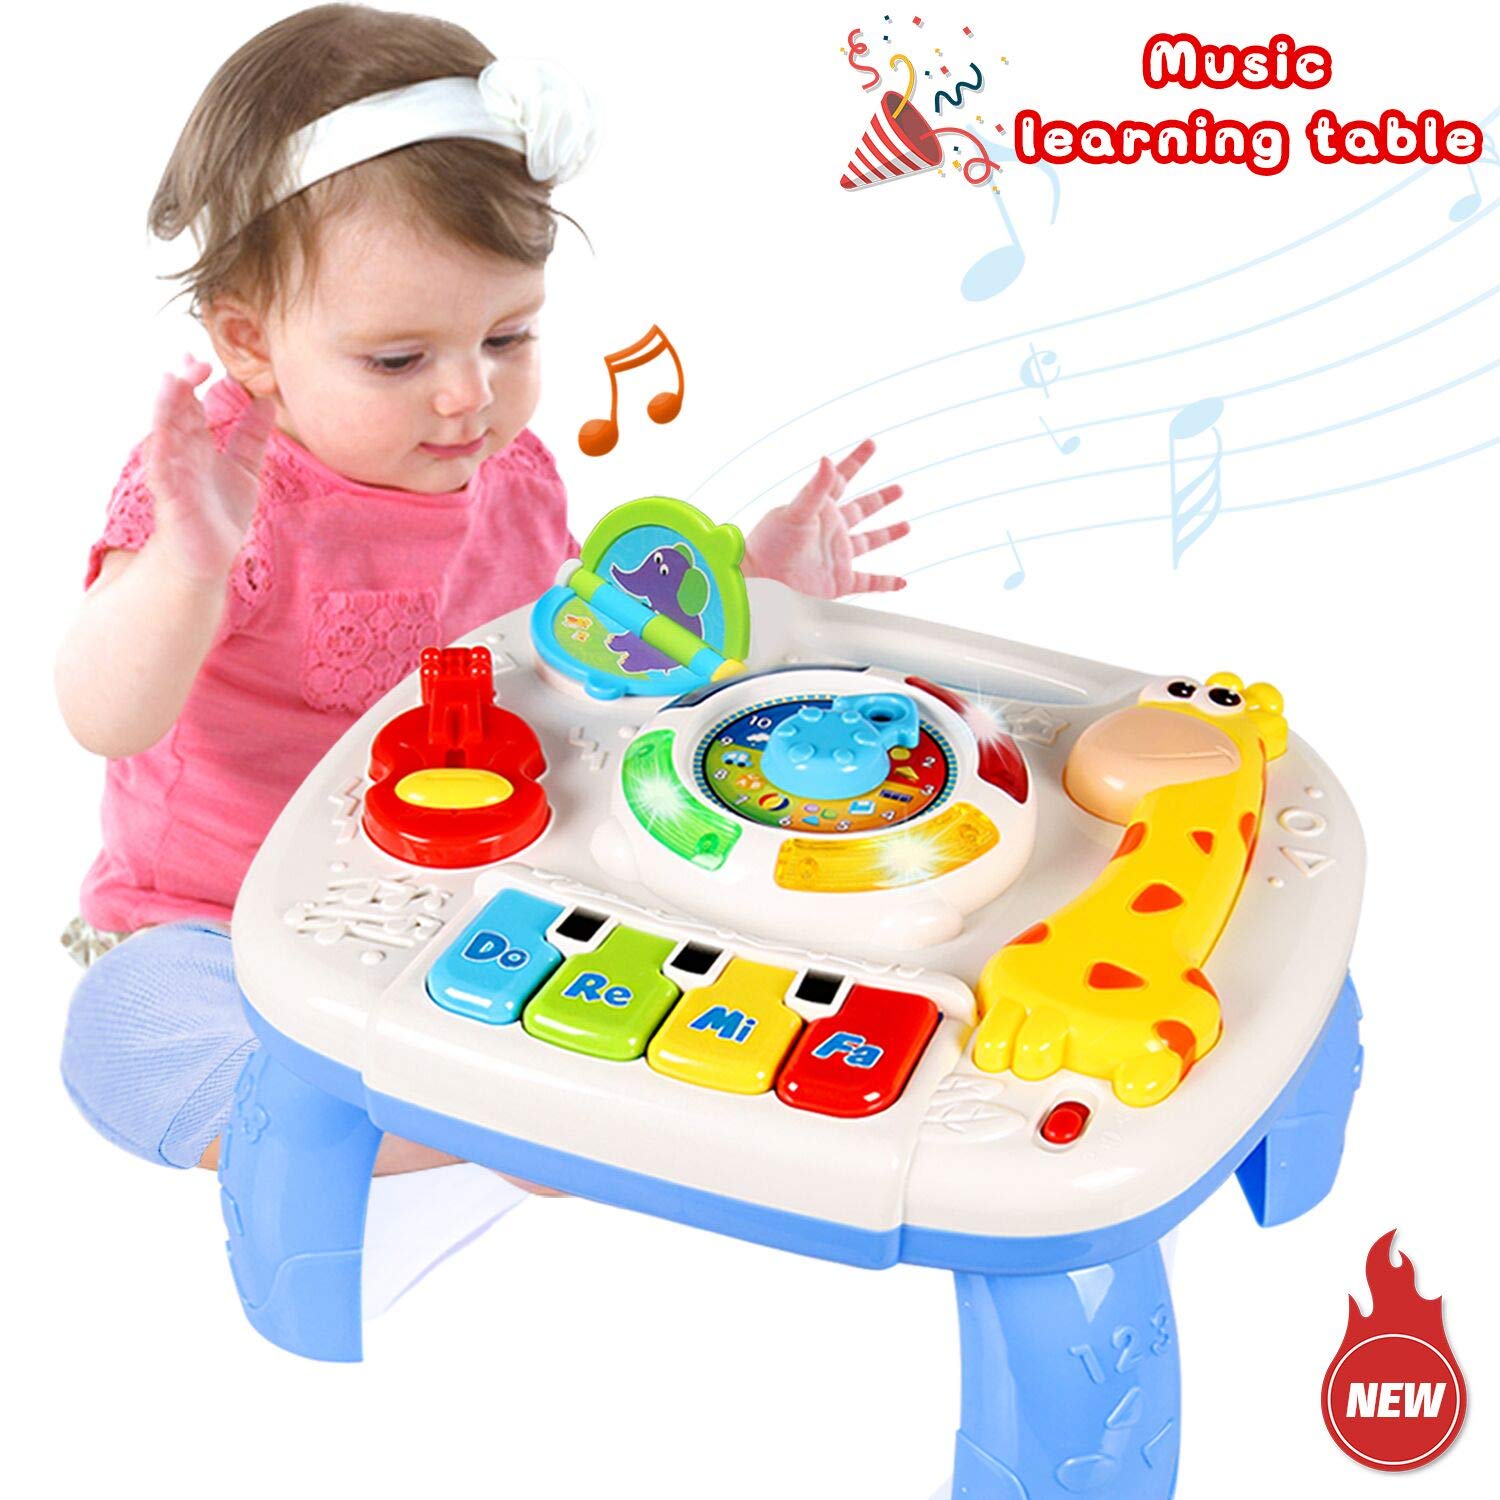 HOMOFY Baby Toys Musical Learning Table 6 Months Up- Early Education Activity Center Multiple Modes Game Kids Toddler Boys & Girls Toys for 1 2 3 Years Old Best Gifts